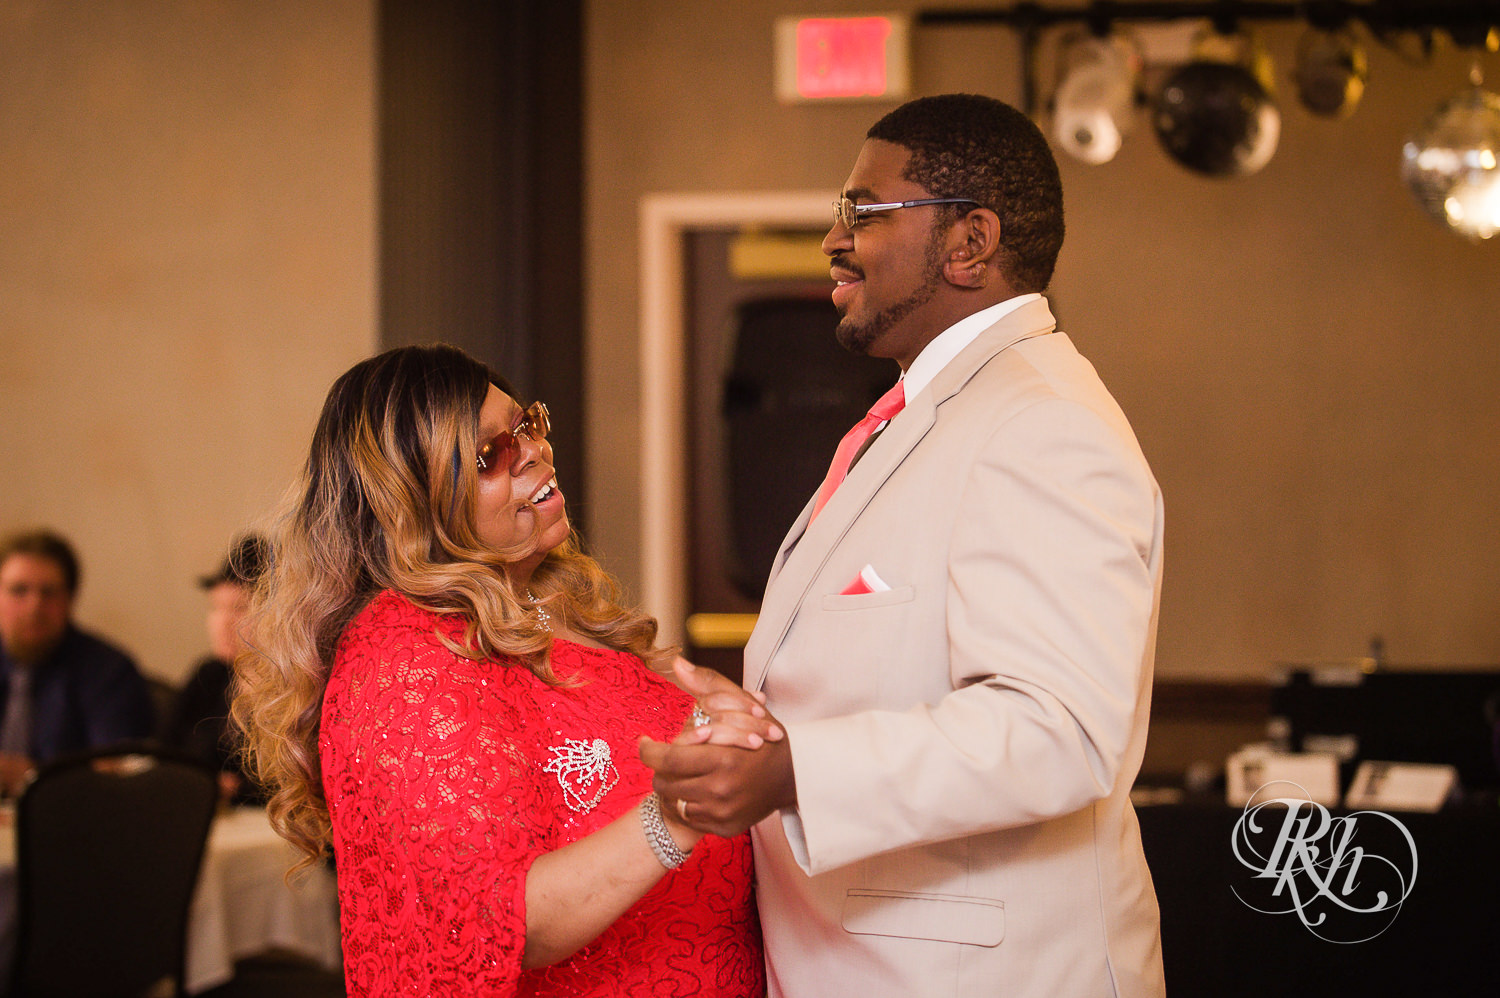 Groom and mom dance during wedding reception at North Metro Event Center in Shoreview, Minnesota.